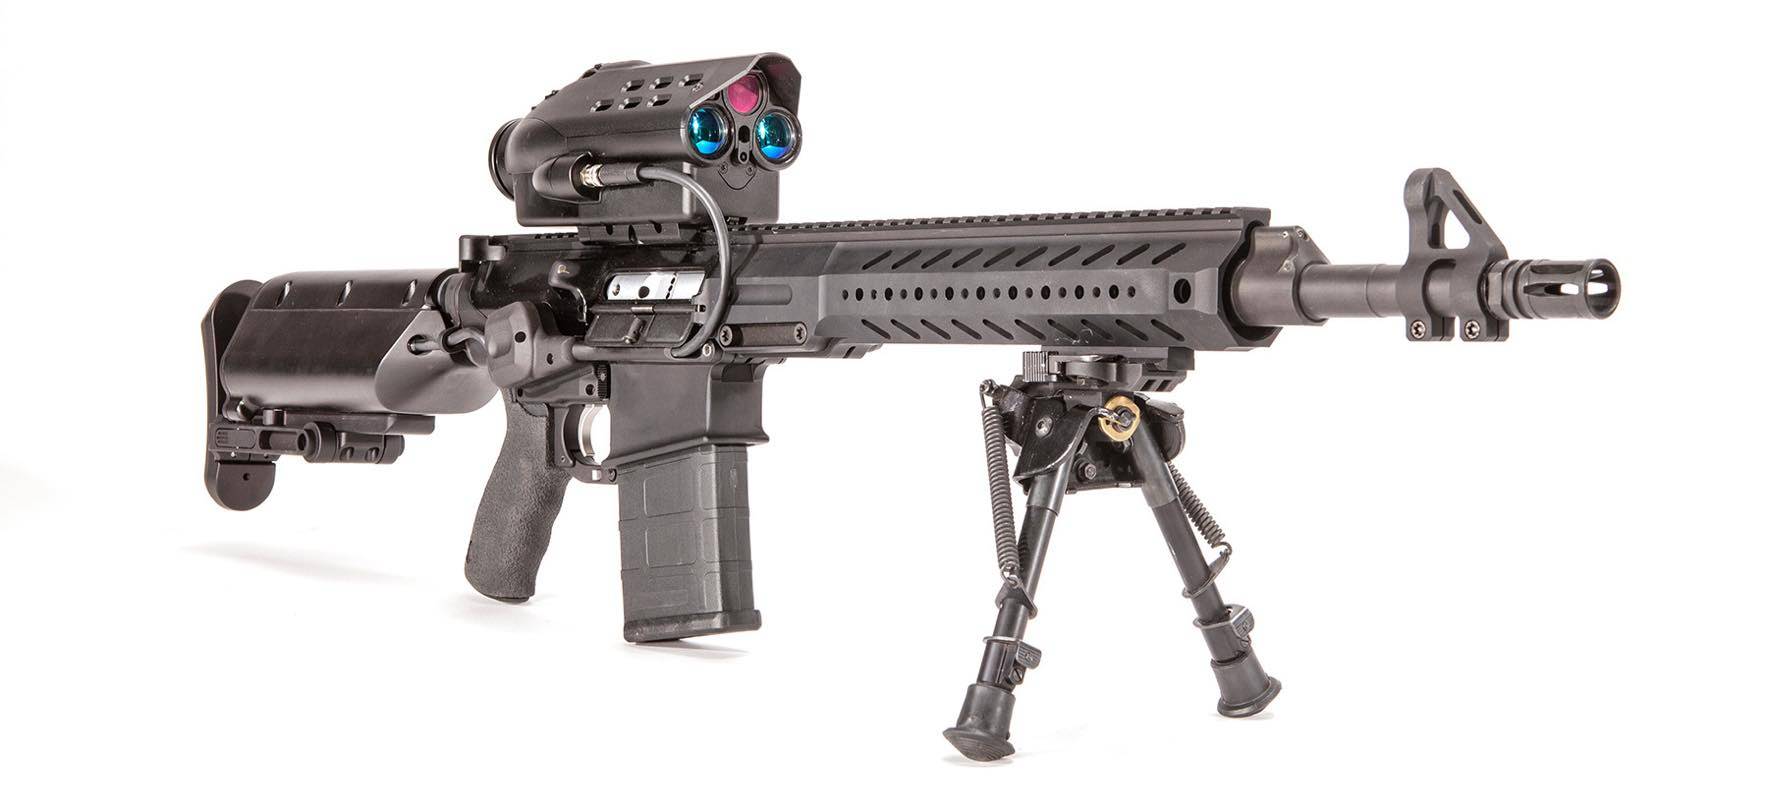 AR-15 Rifle With Bipod, Optic, and Magazine Inserted